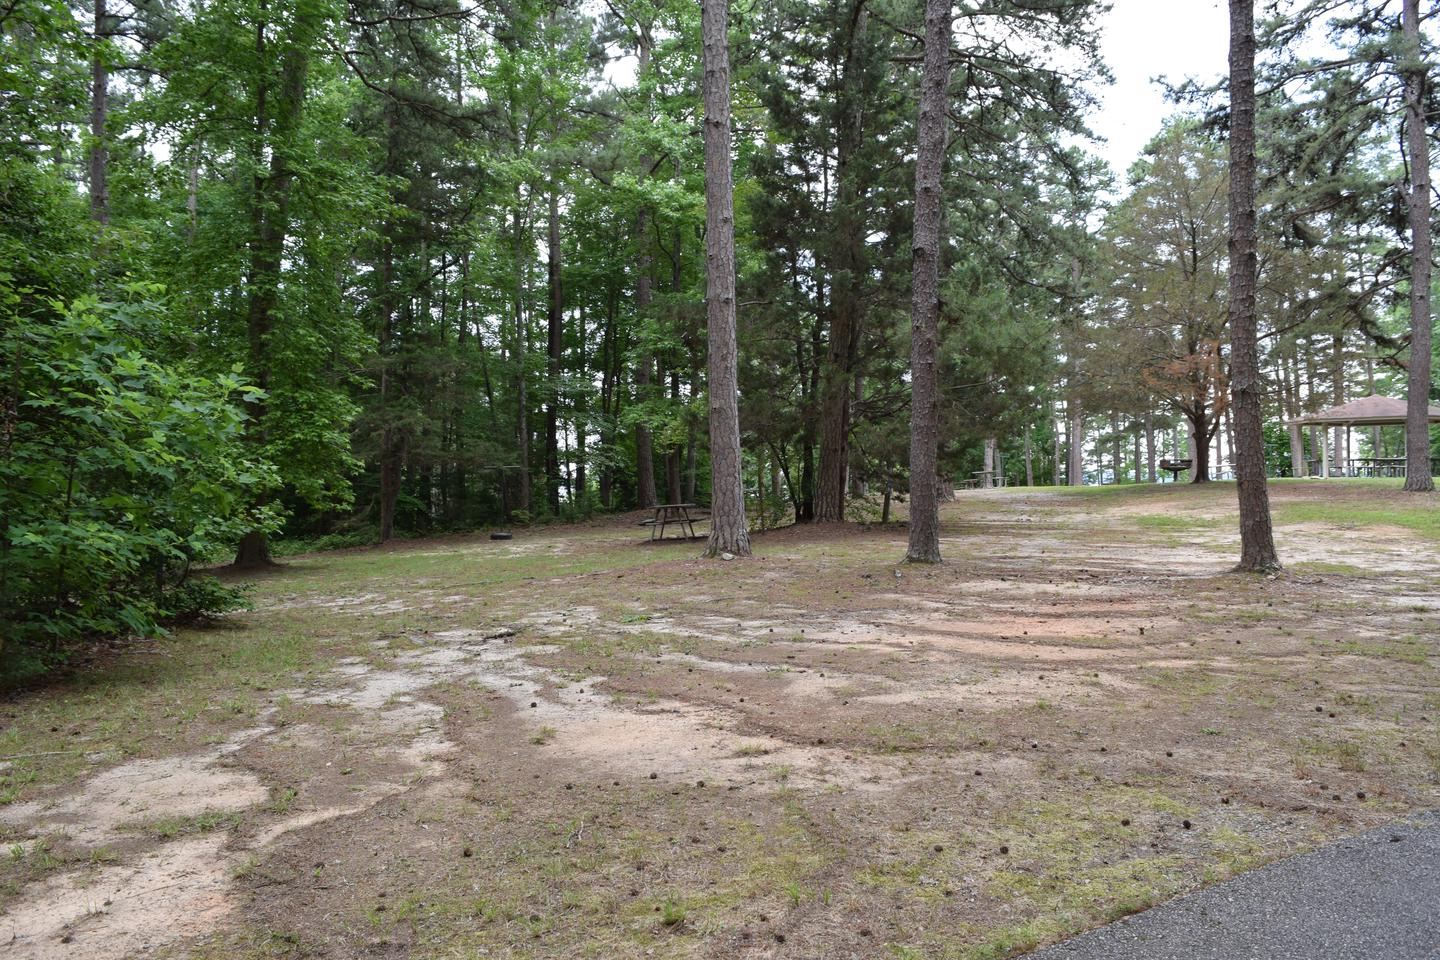 Mays Chapel Group Camping Area Welcome to Mays Chapel Group Camping Area! This is a picture of some of the picnic tables in the area. There are no designated spots for tents to set up in this group camping area. 